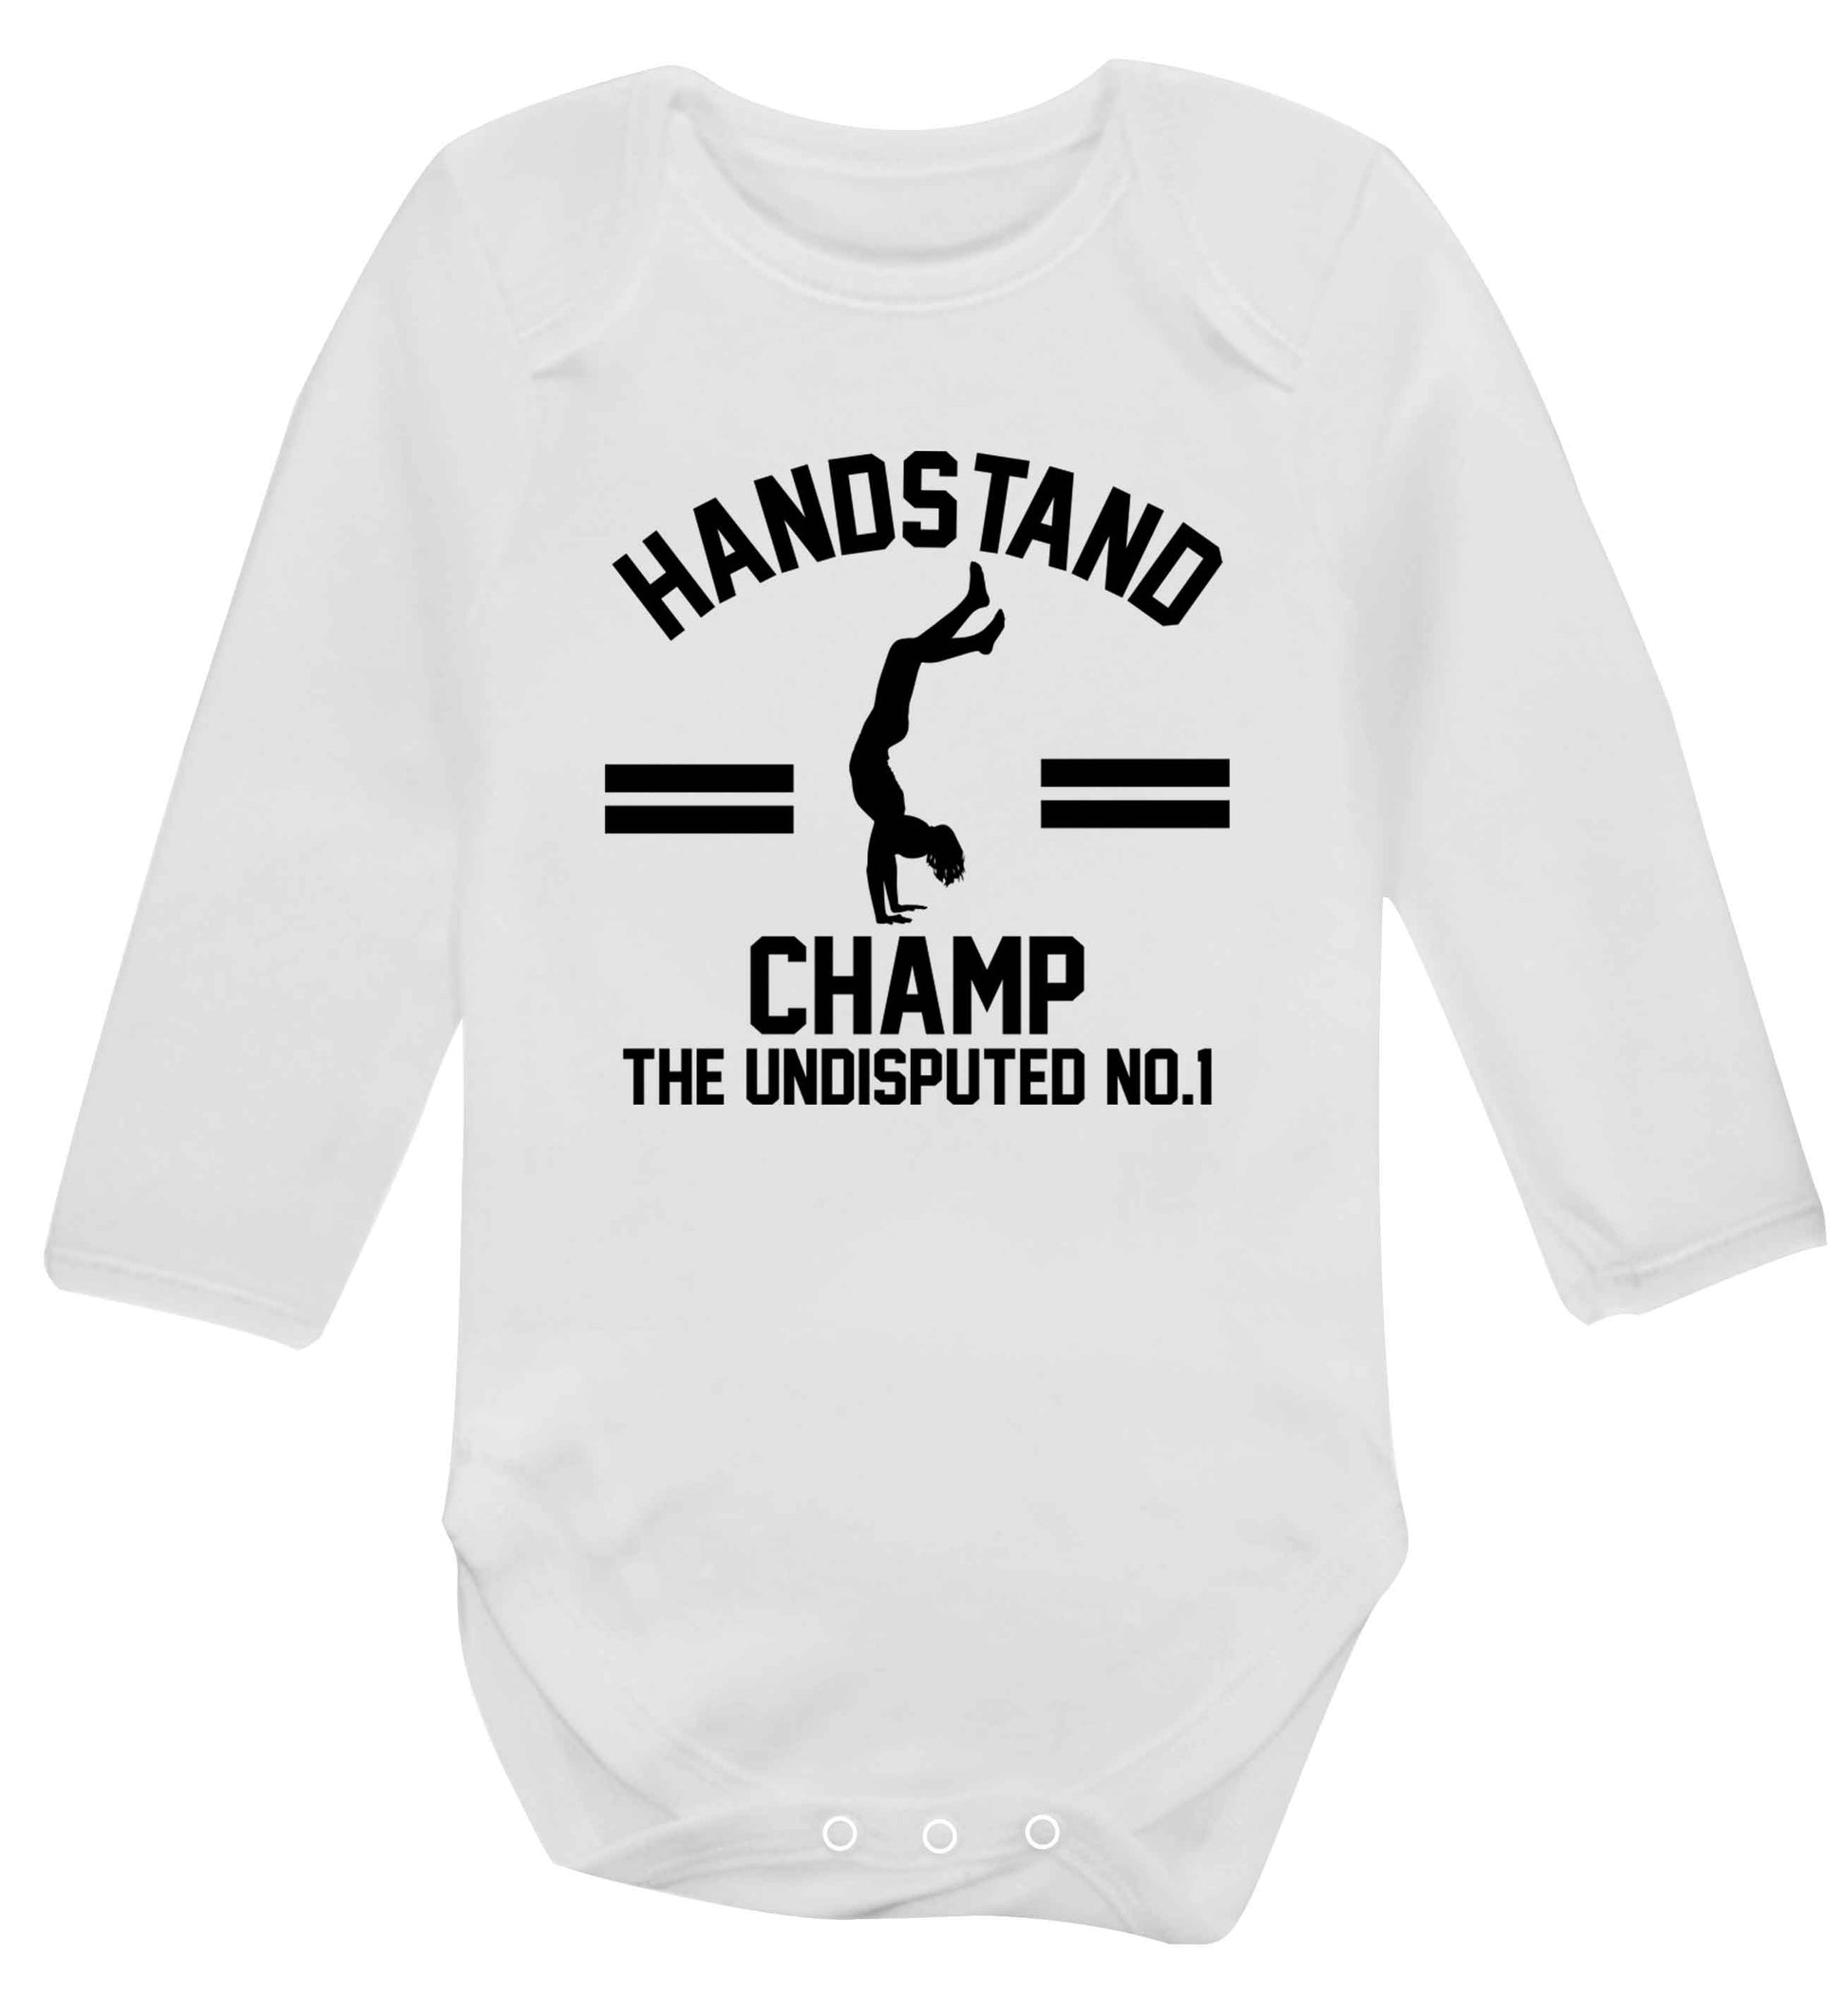 Undisputed handstand championship no.1  Baby Vest long sleeved white 6-12 months